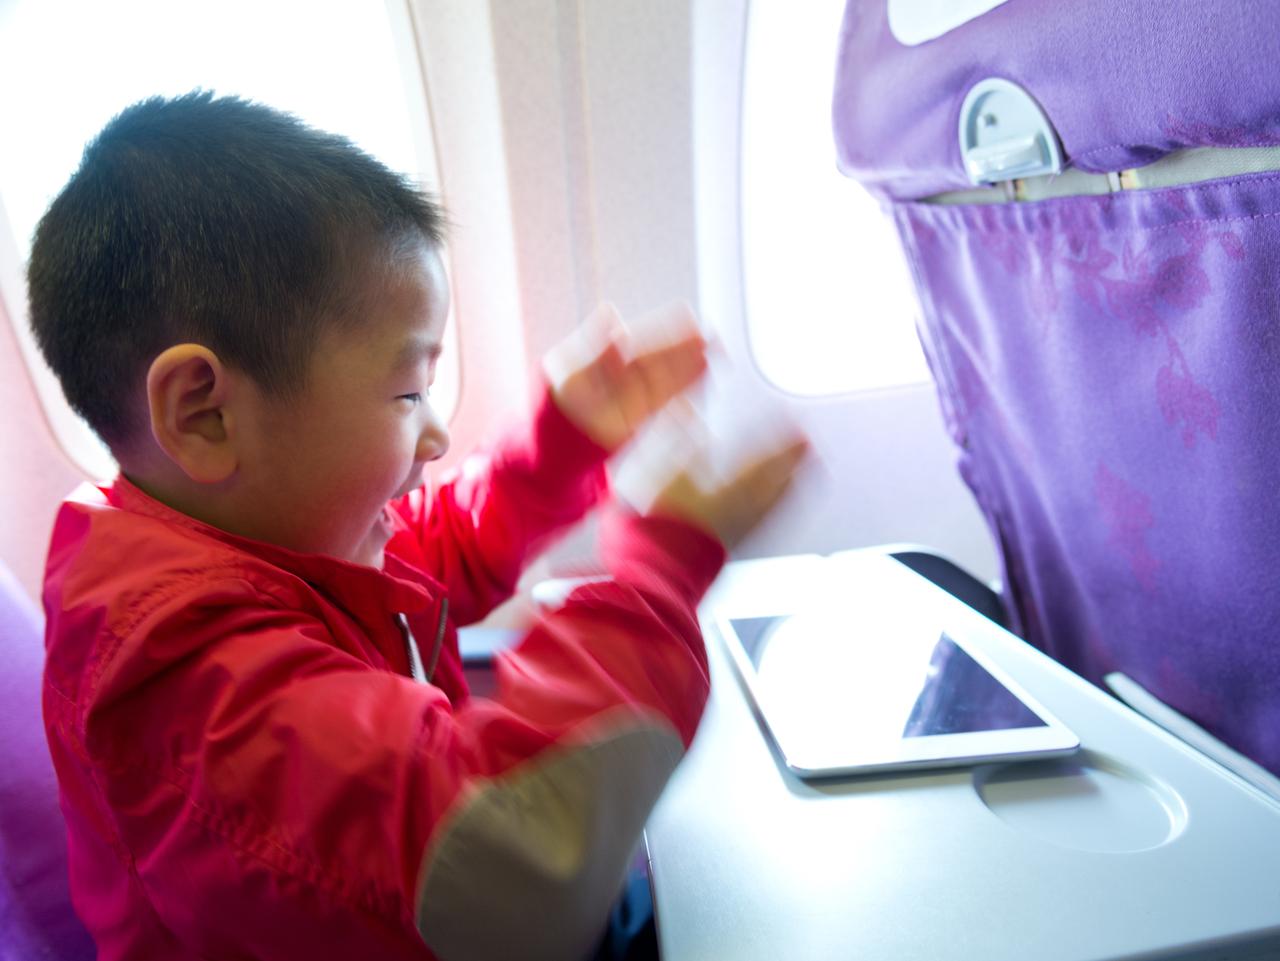 Little boy playing with a tablet computer in plane